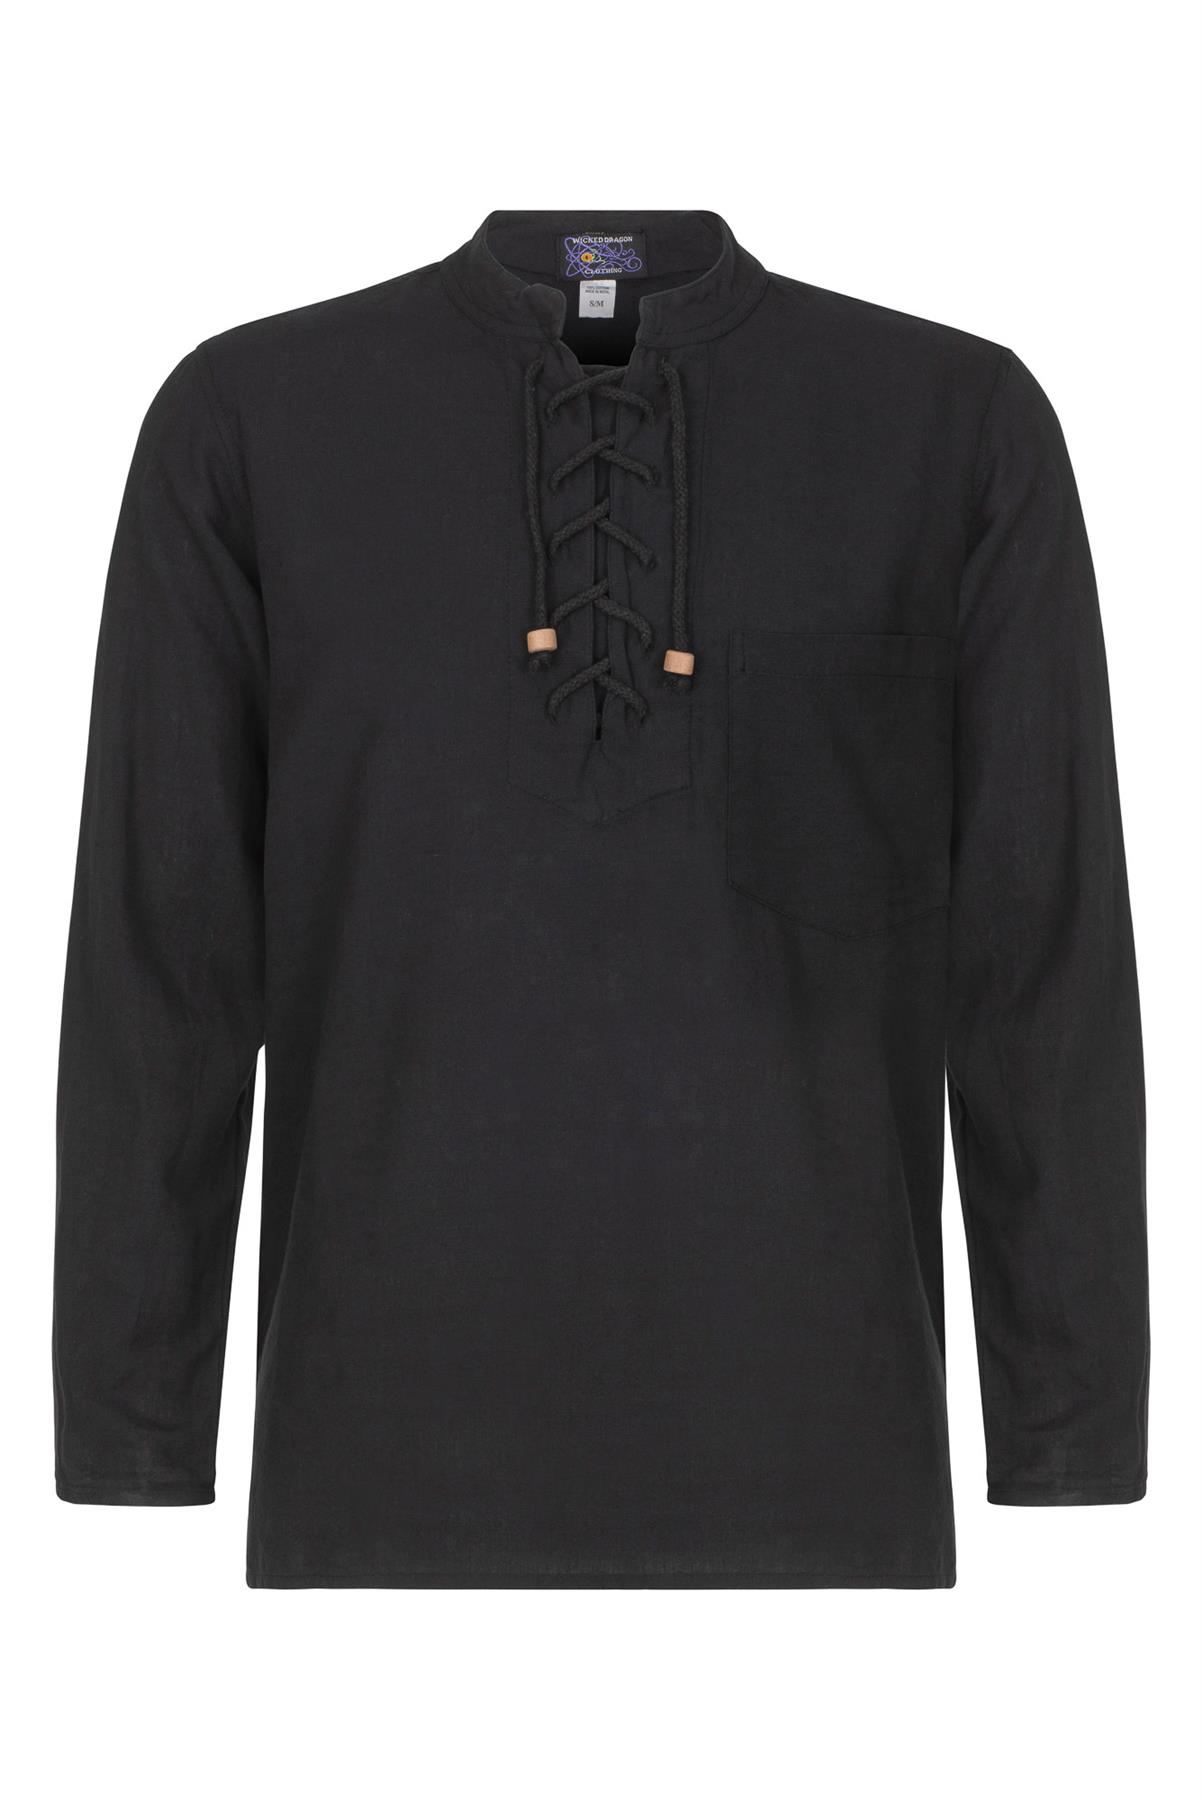 Wicked Dragon Clothing - Long sleeve medieval style shirt